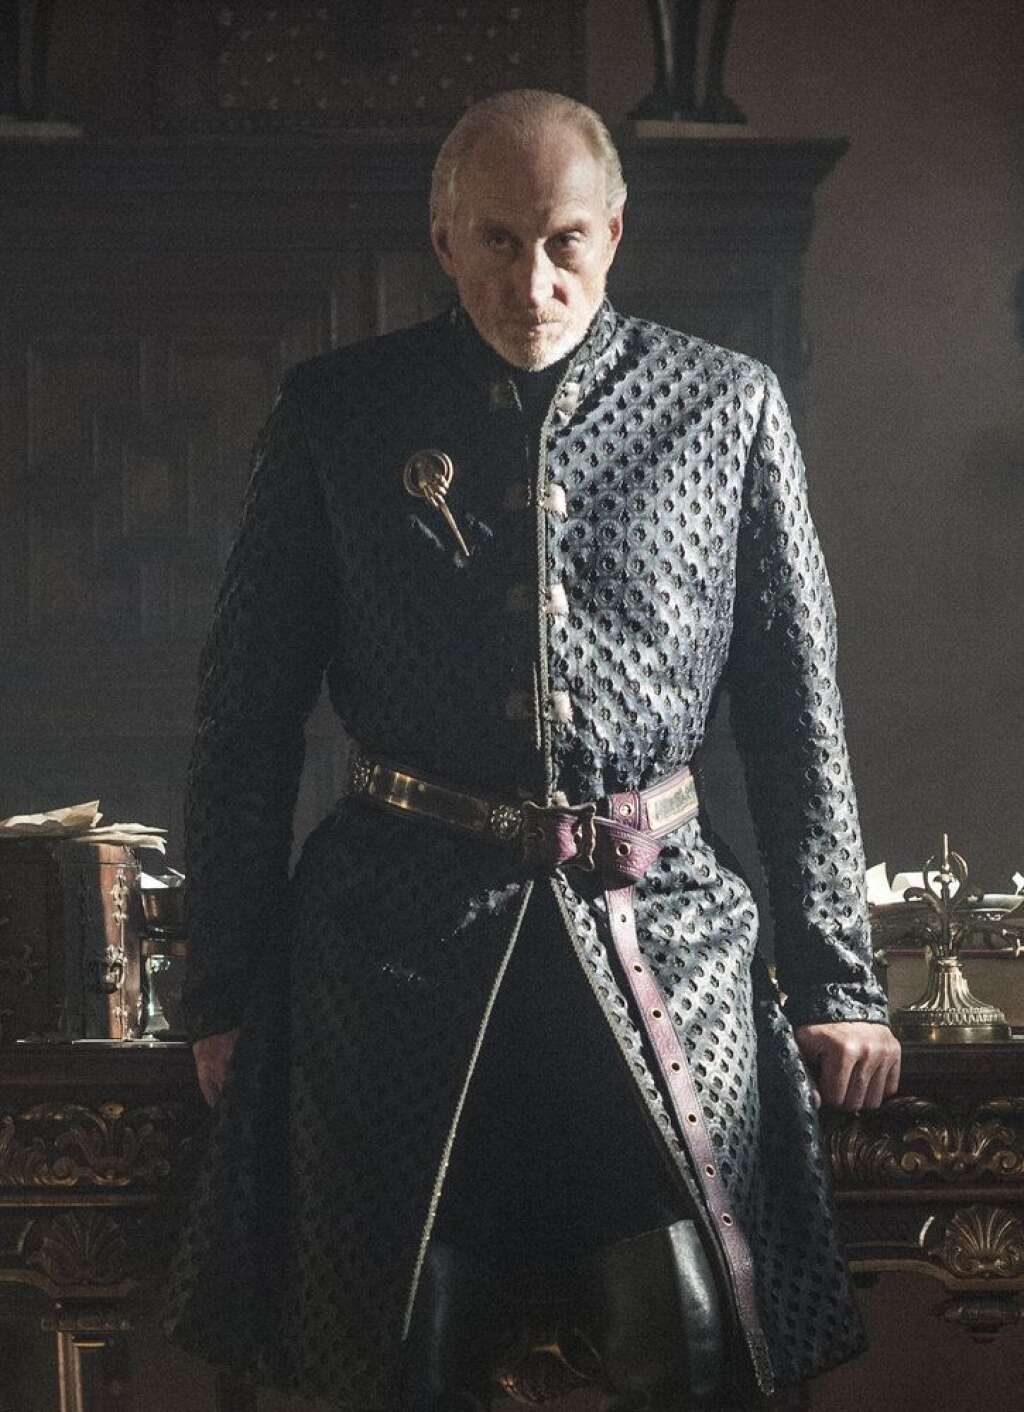 'Game Of Thrones' Season 3, Episode 10 - Charles Dance as Tywin Lannister